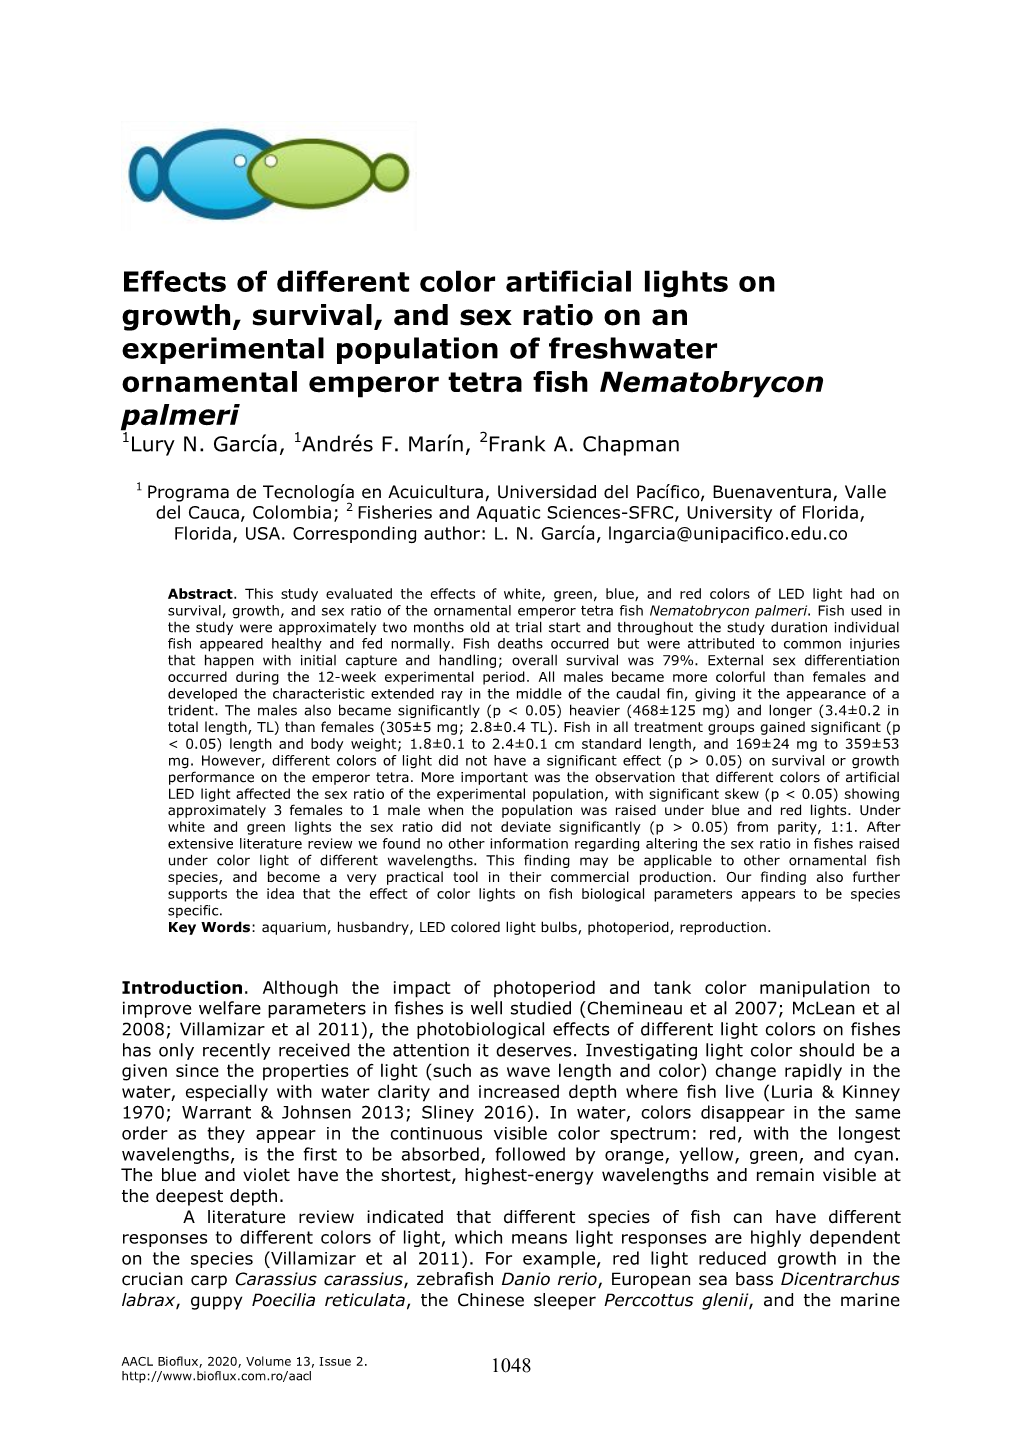 Effects of Different Color Artificial Lights on Growth, Survival, and Sex Ratio On